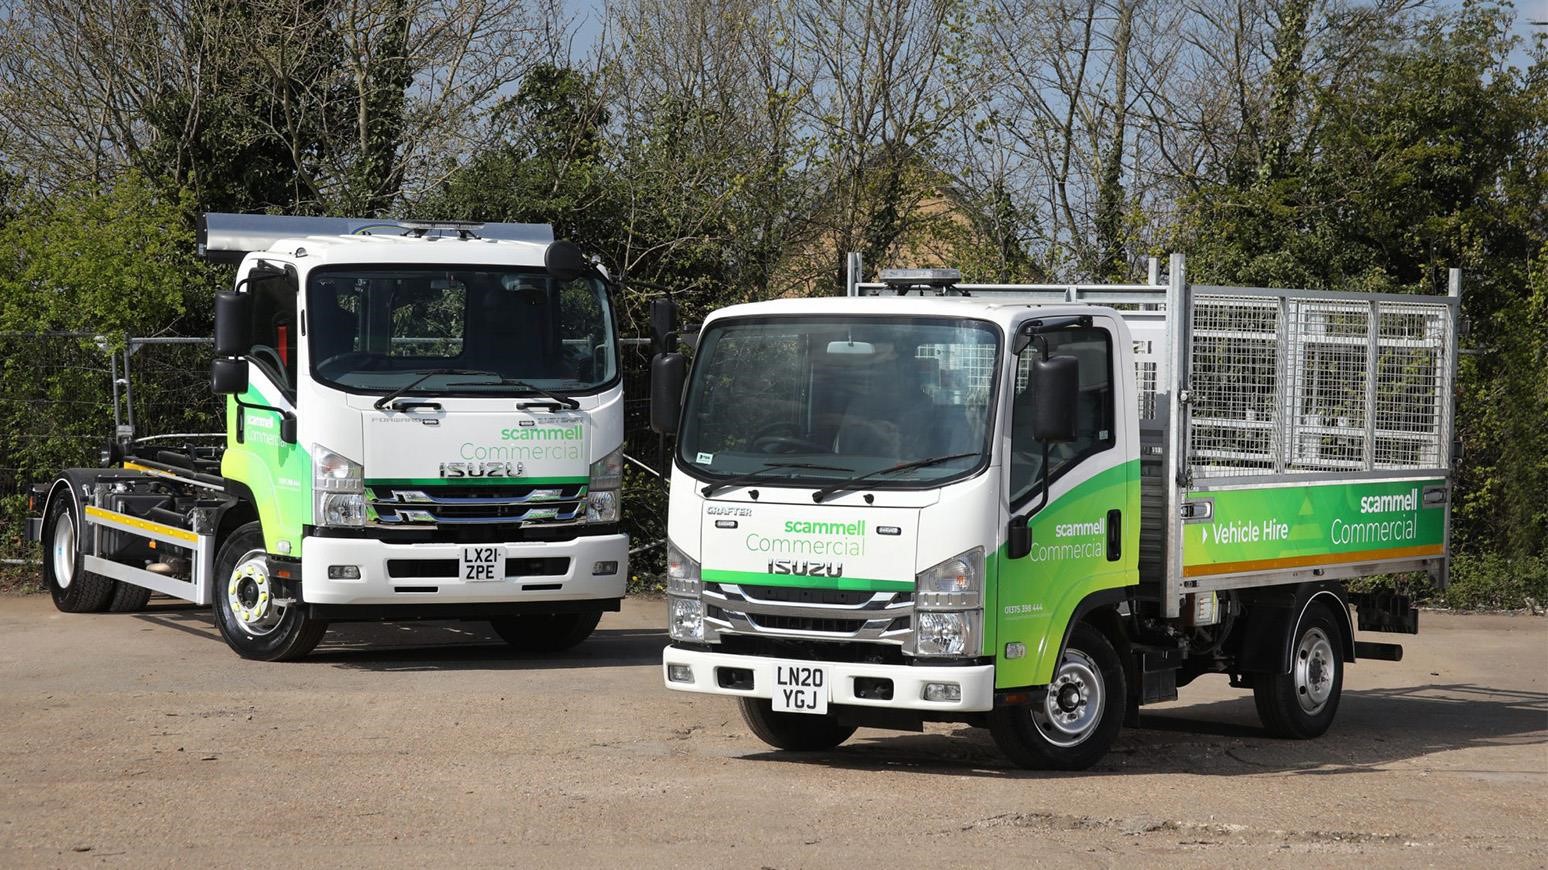 Compact Footprint, Big Payload & 3-Year Warranty: Isuzu Trucks A Winning Combination For Scammell Commercial